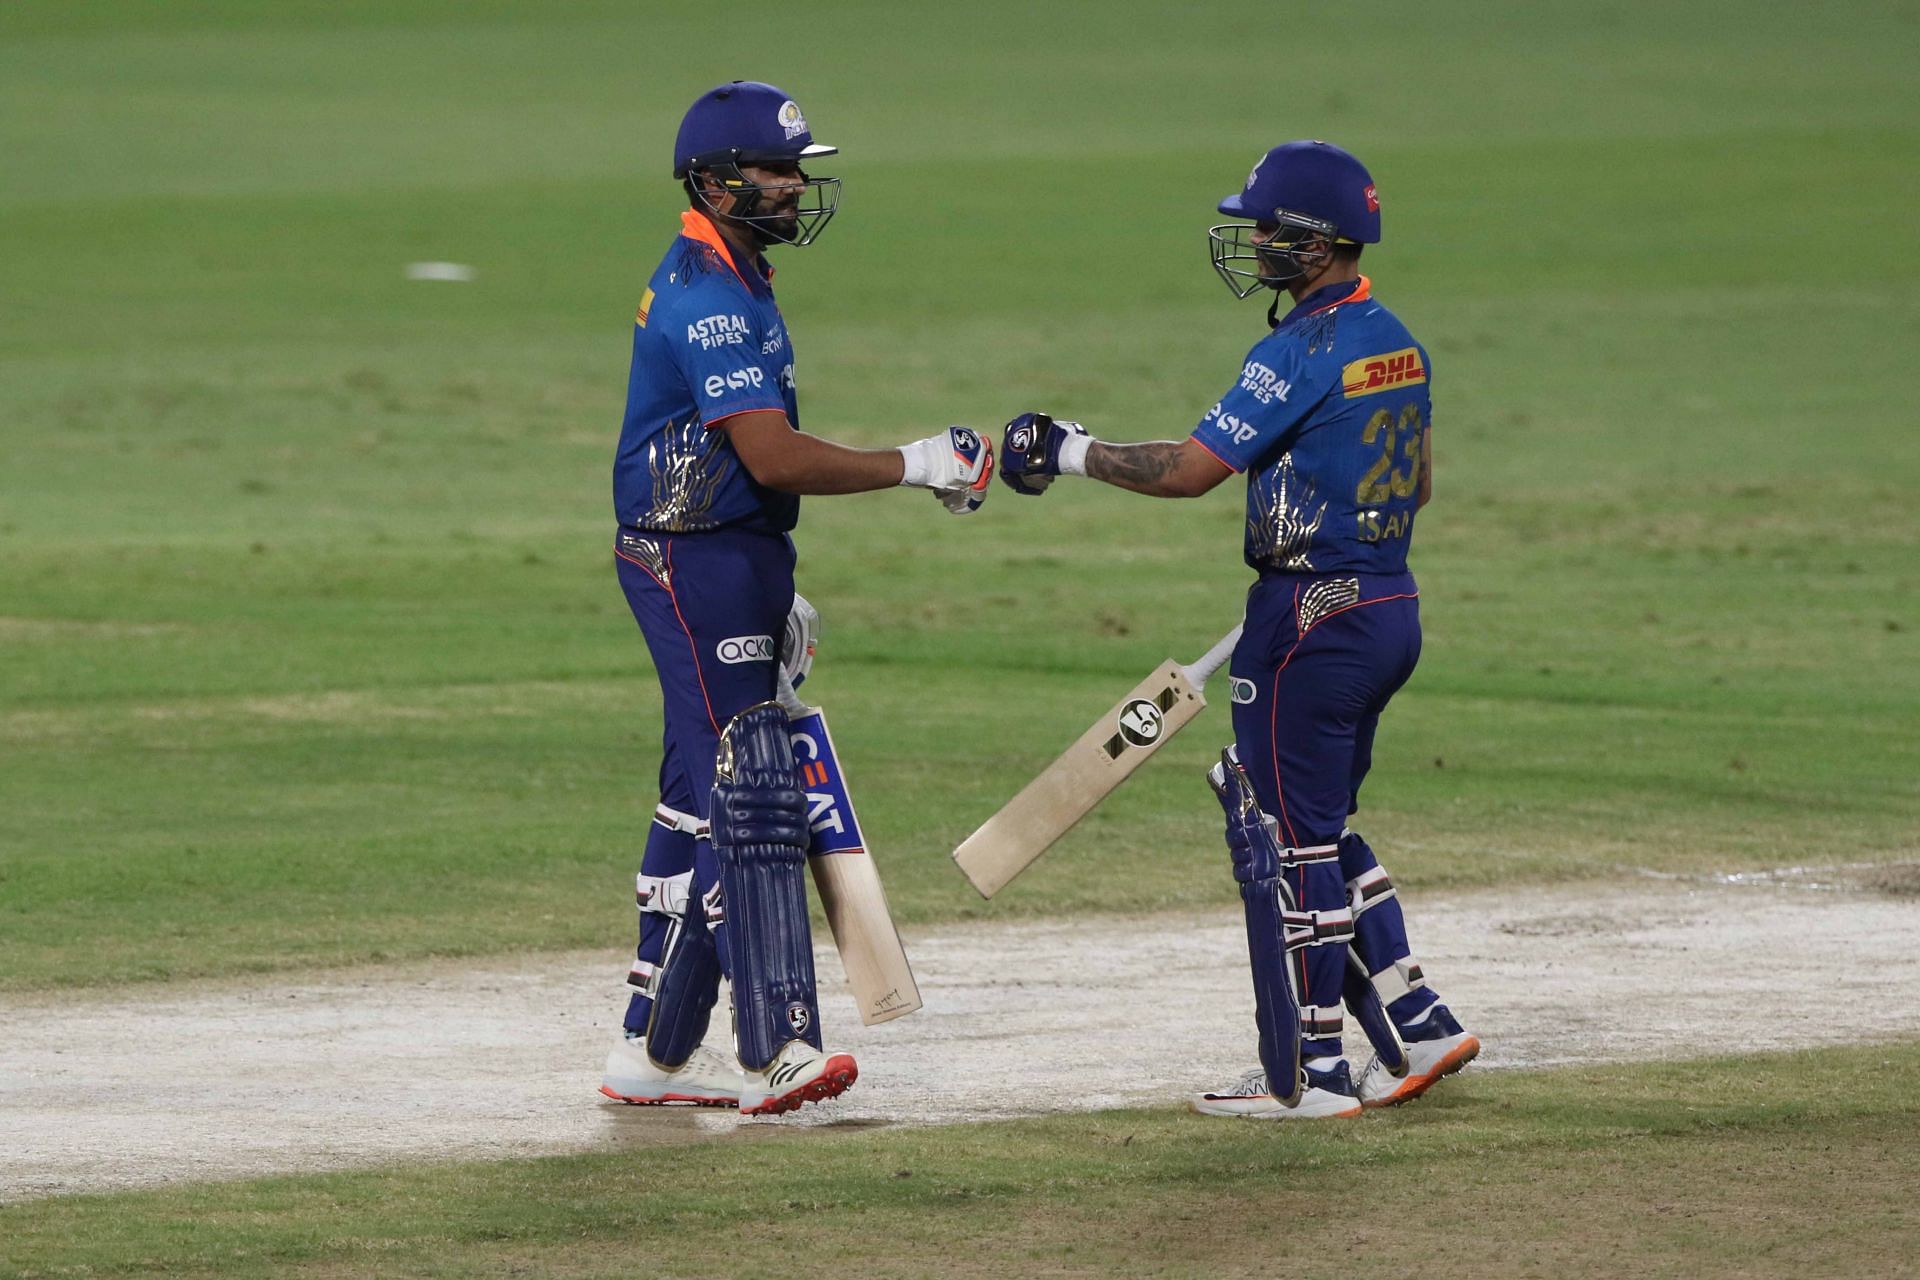 Rohit Sharma and Ishan Kishan are likely to open for the Mumbai Indians [P/C: iplt20.com]